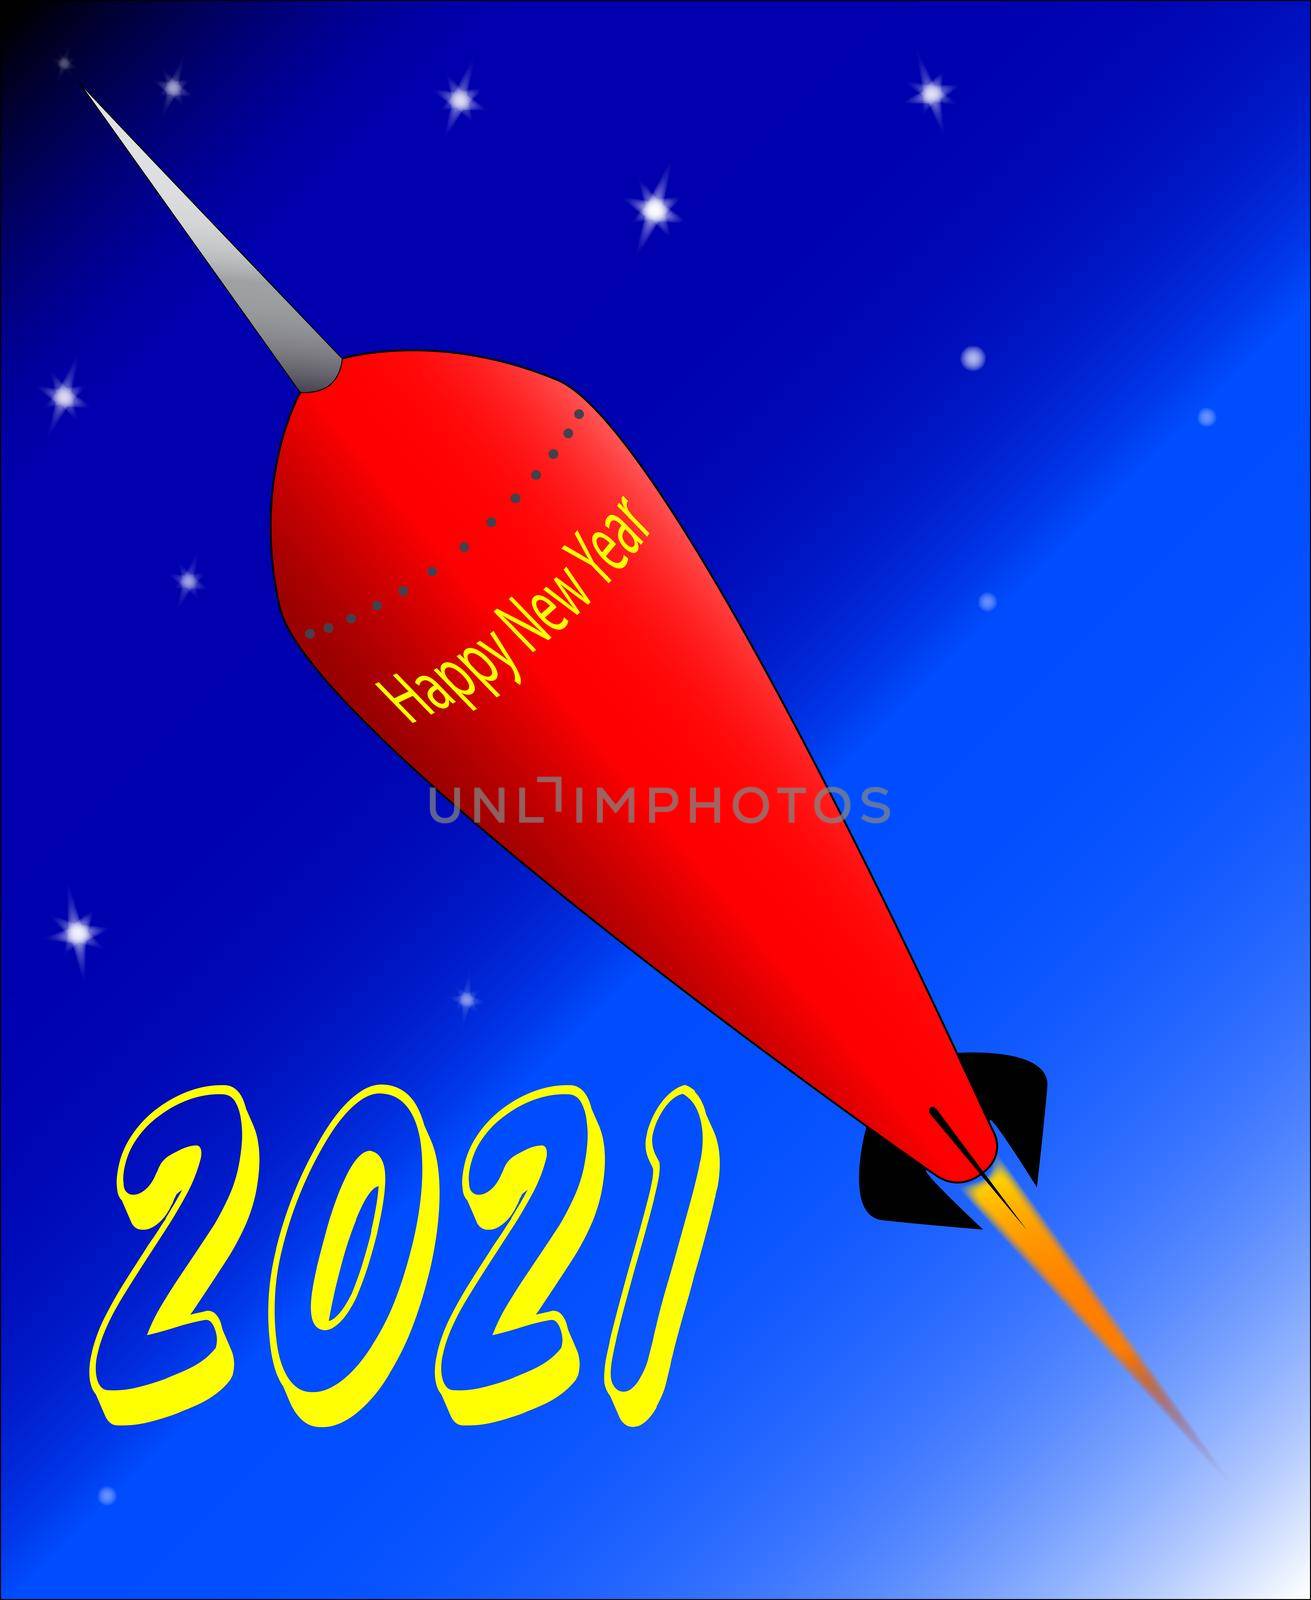 A retro look rocket ship with the message 'Happy New Year 2021'.